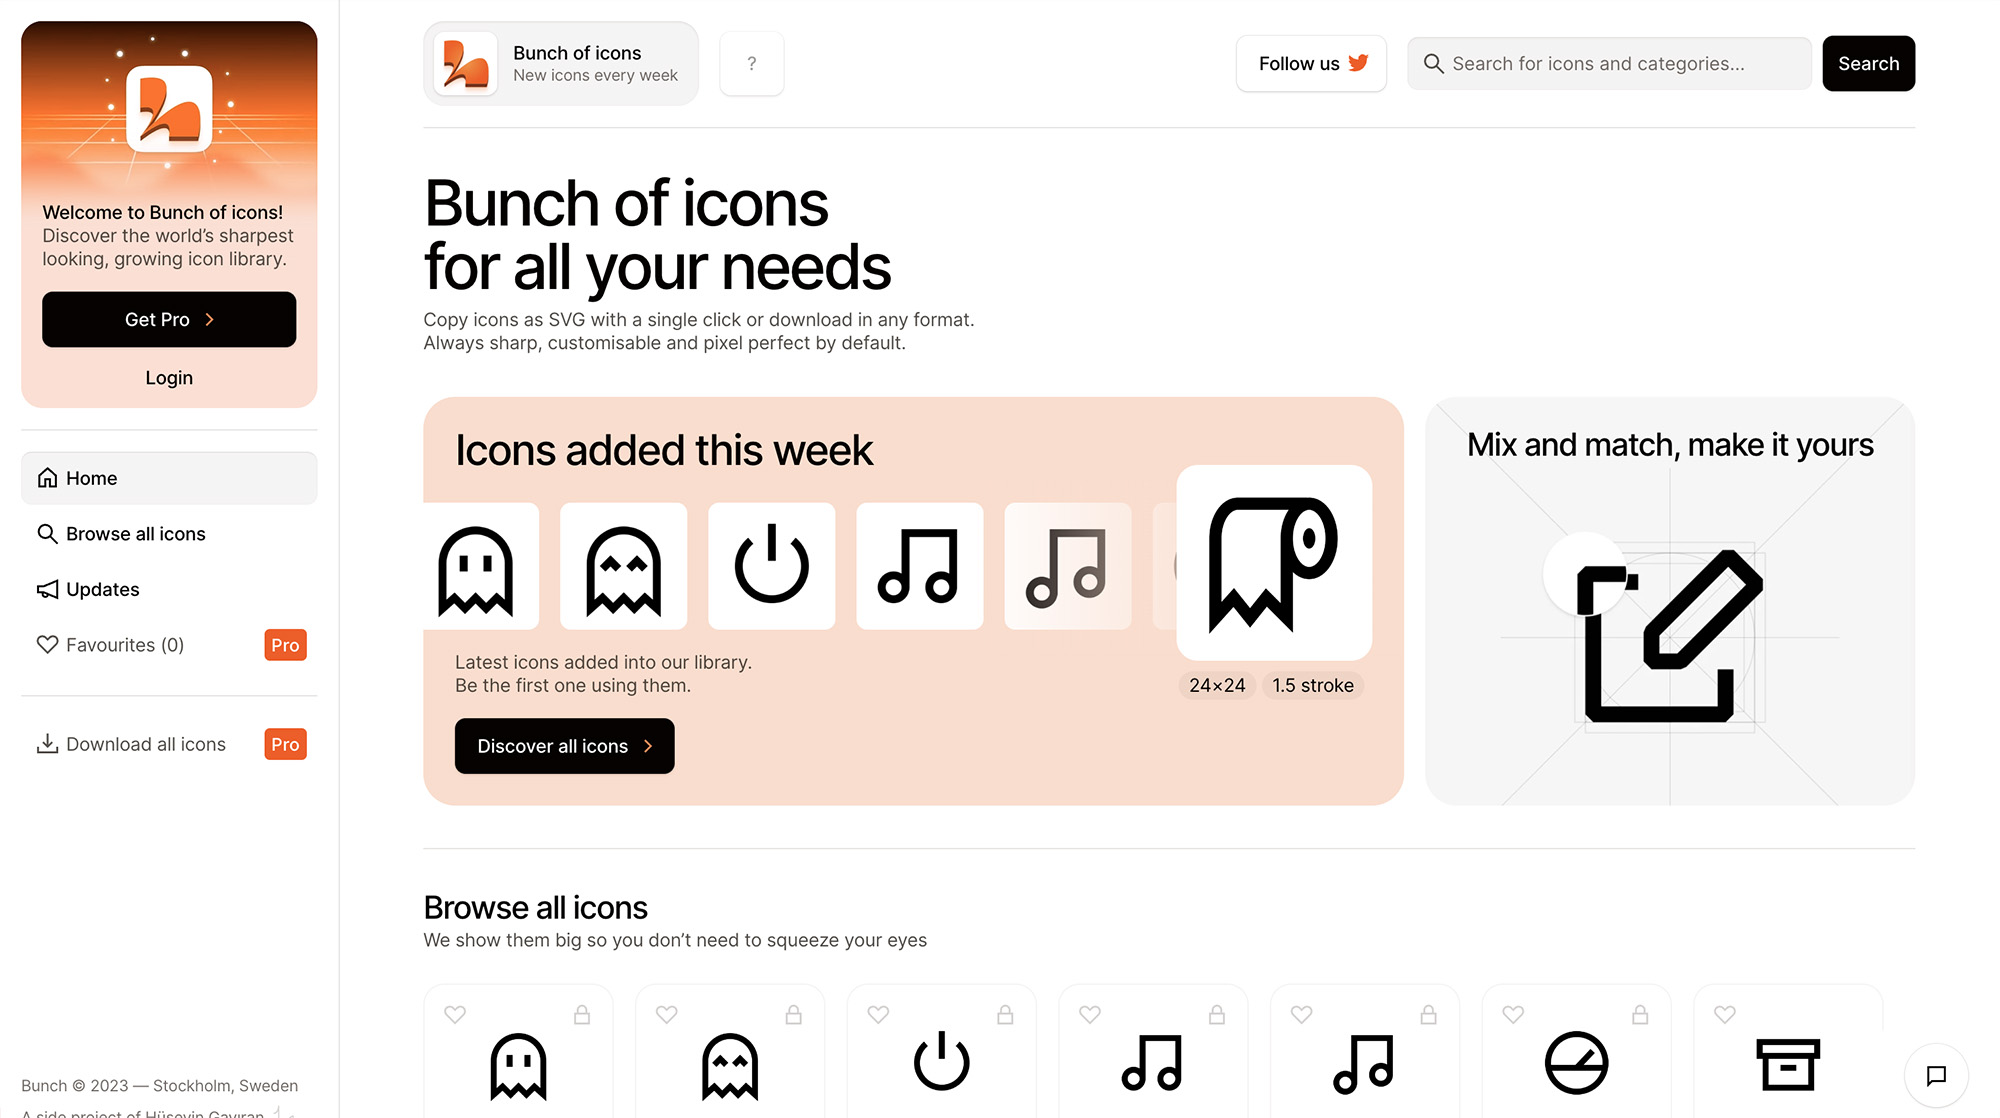 Bunch of icons pack website